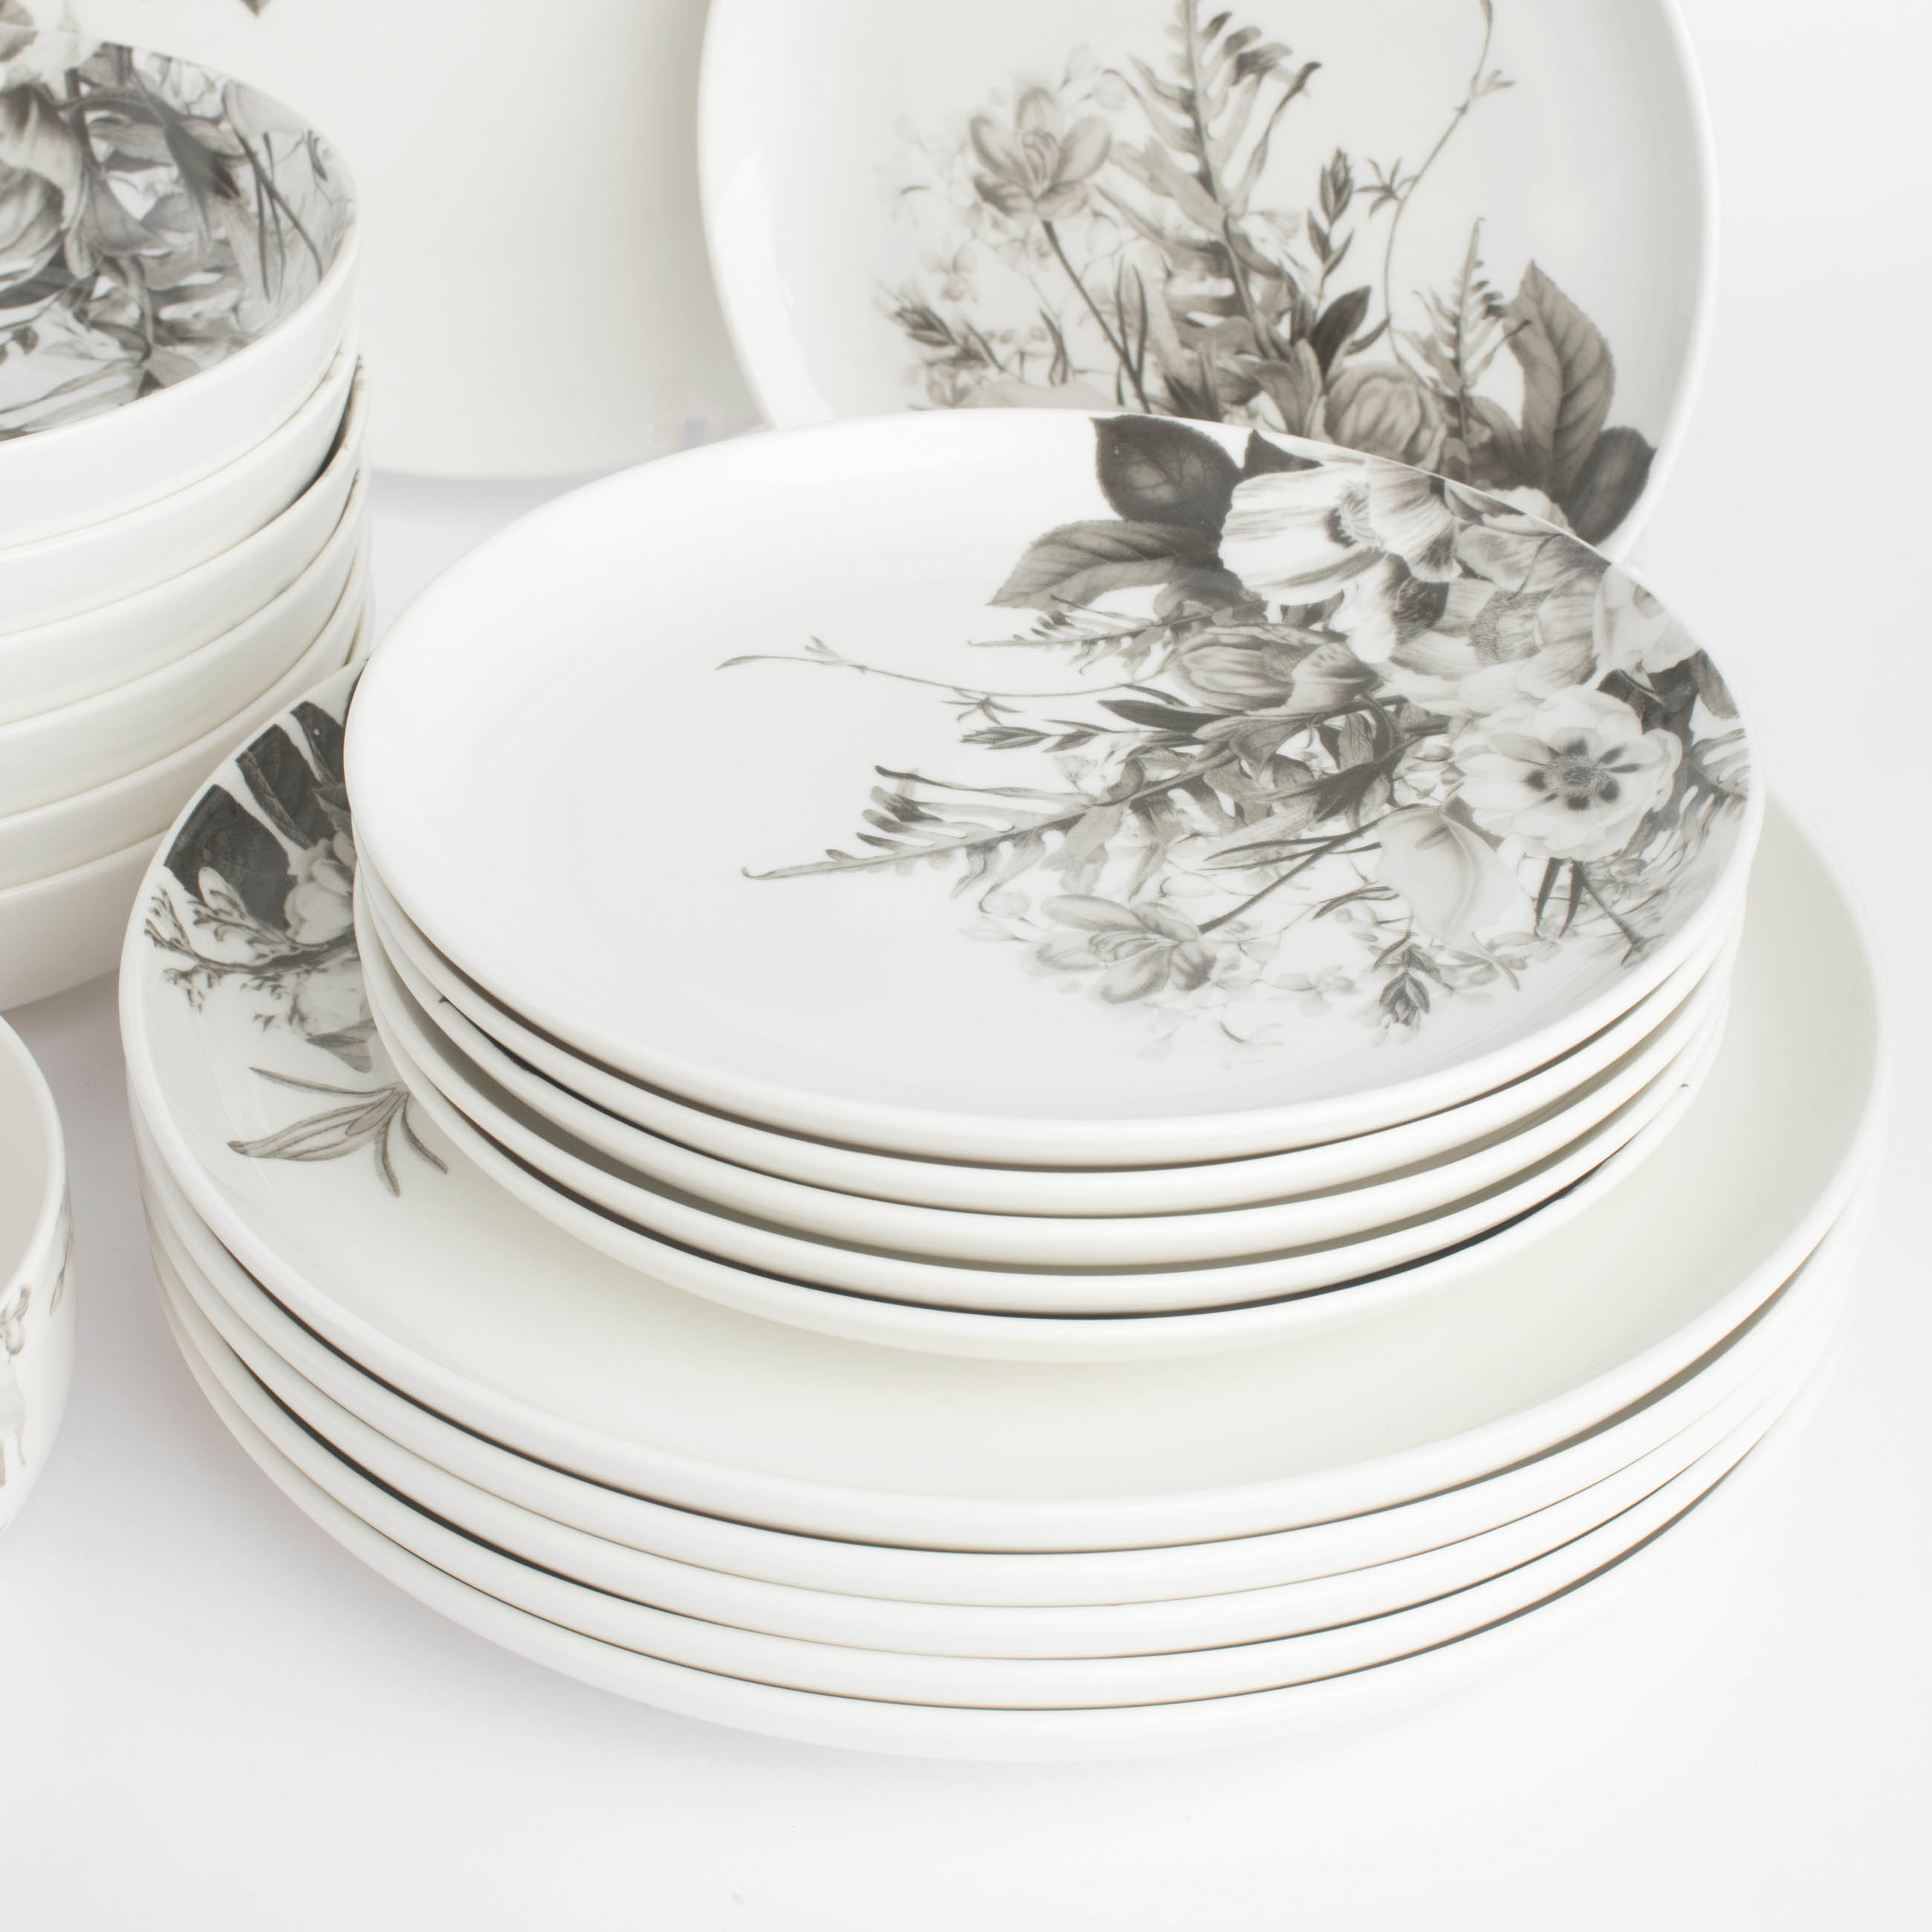 Dining set, 6 persons, 19 items, porcelain N, white, Black and white flowers, Magnolia изображение № 2